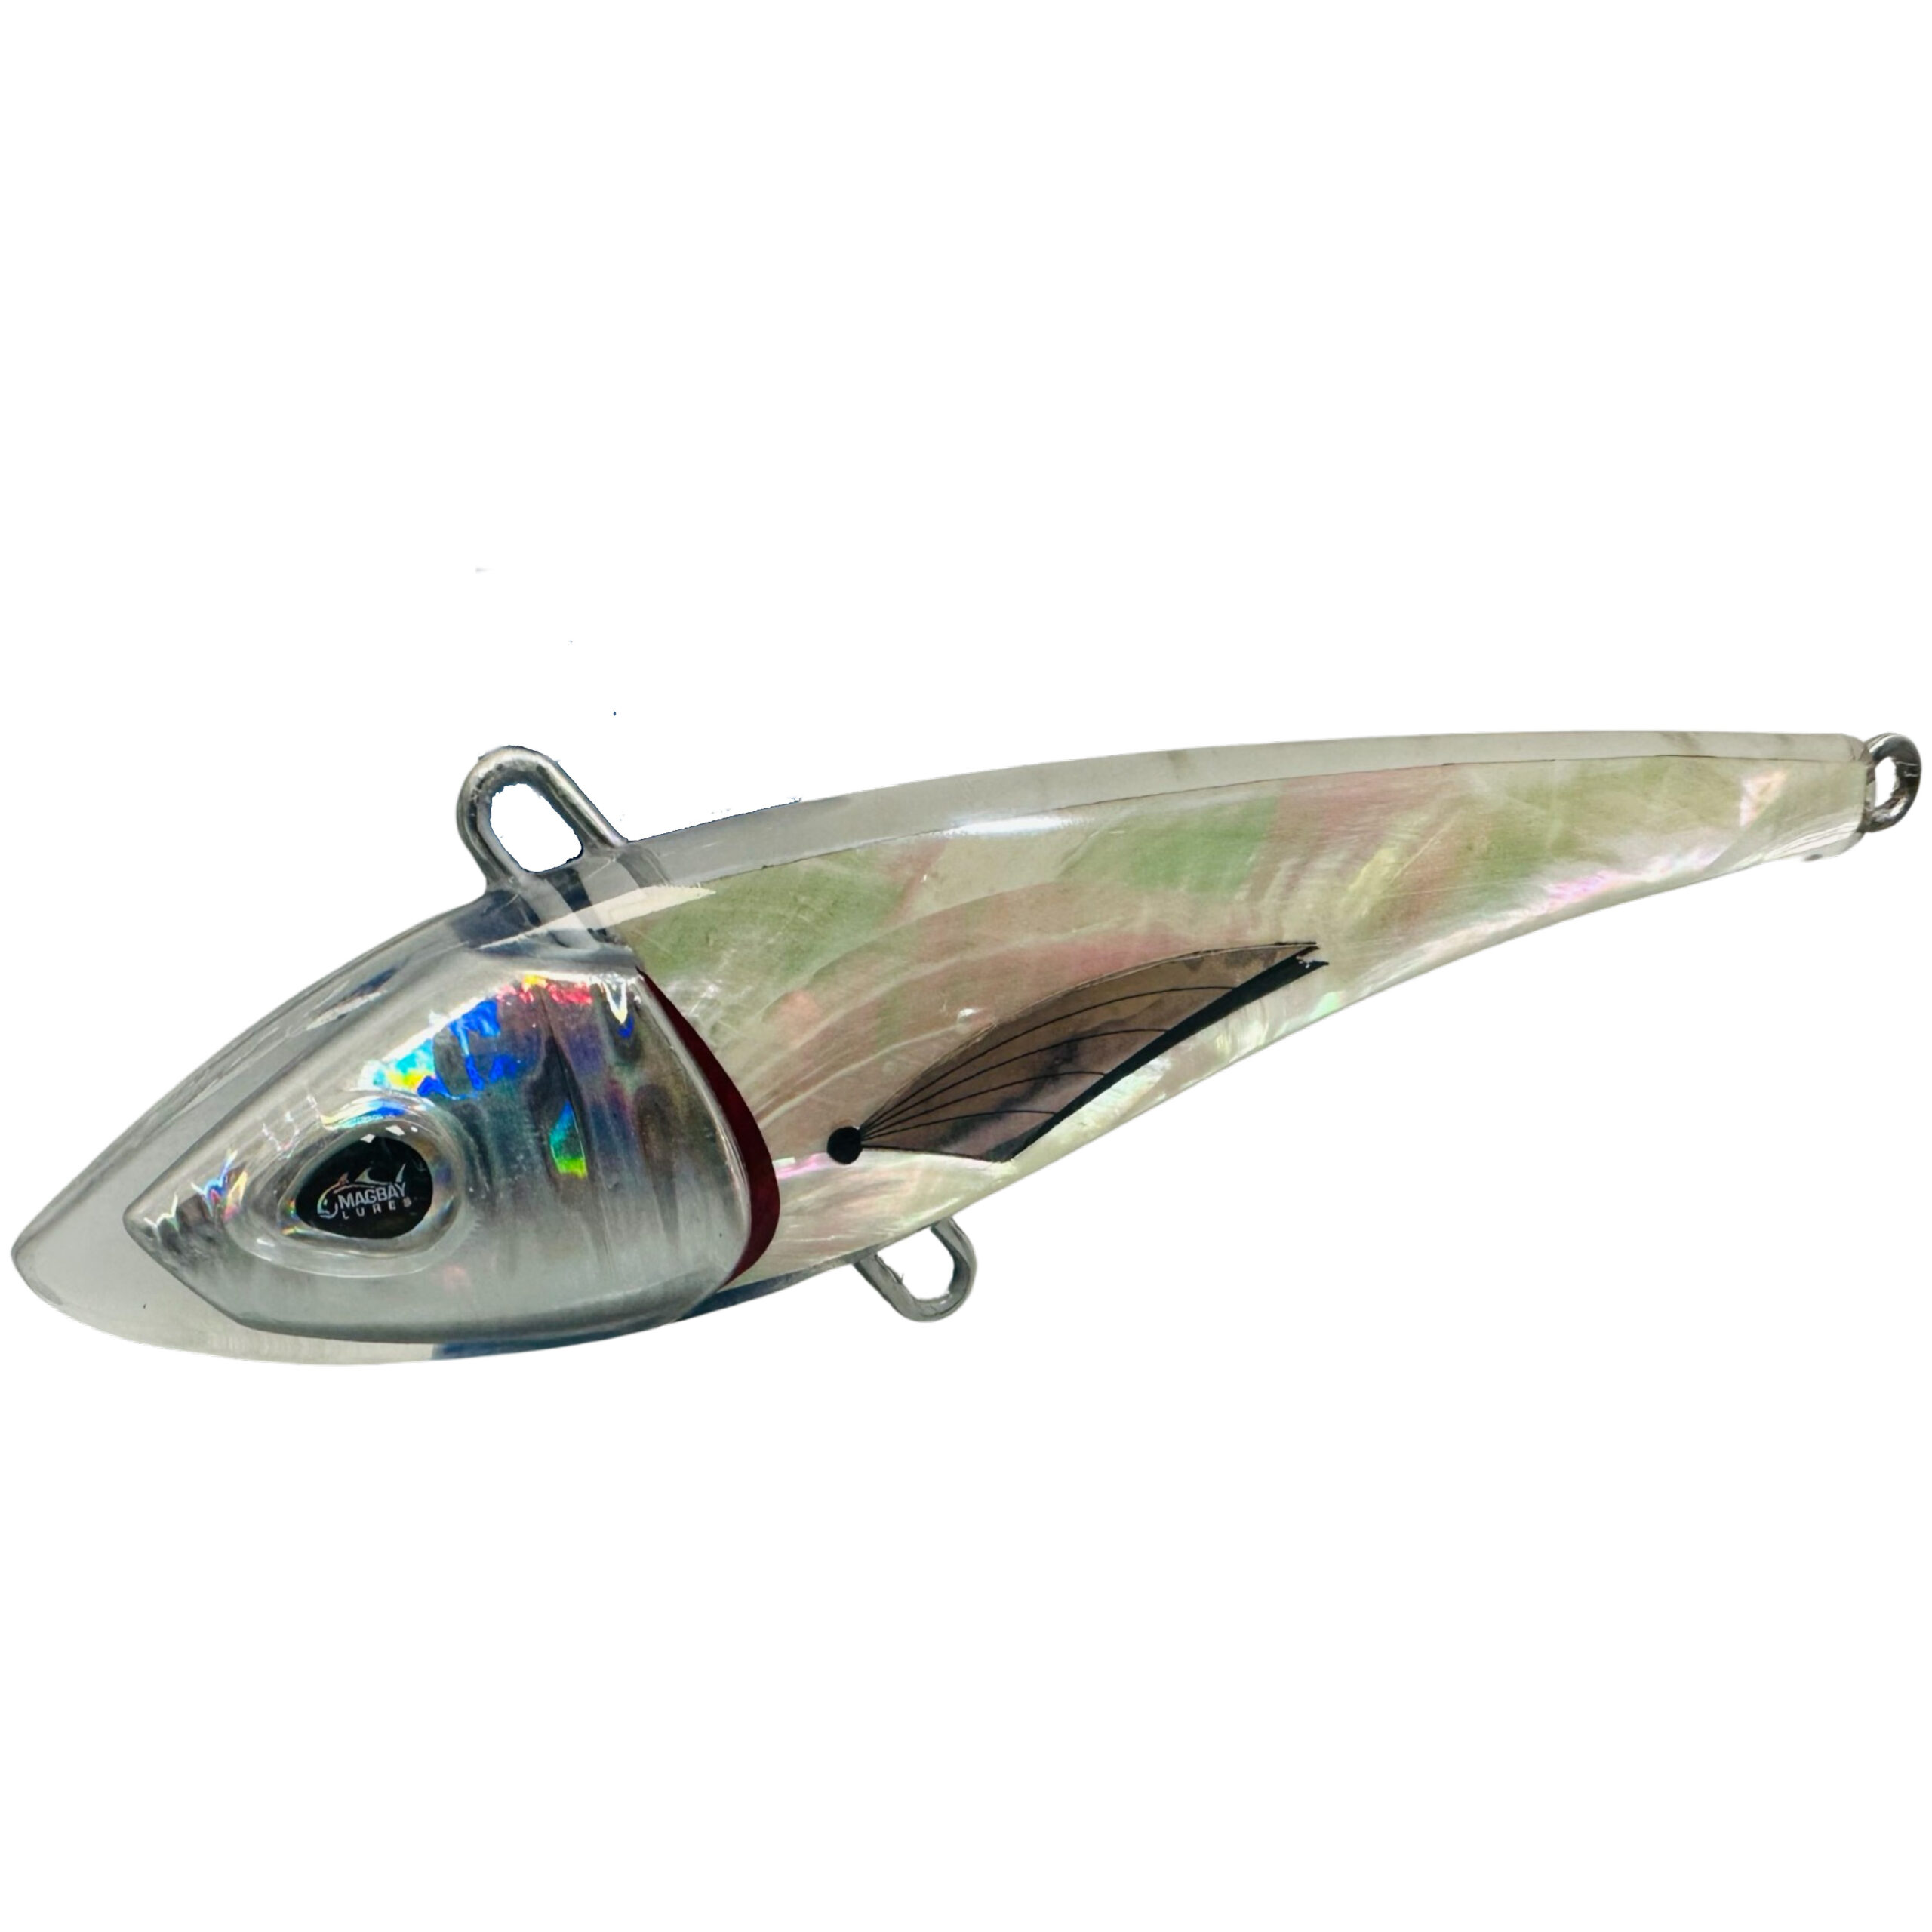 RM5 Solid Resin Abalone 5 Inch UV Minnow Lure - MagBay Lures - Wahoo and  Marlin Fishing Lures